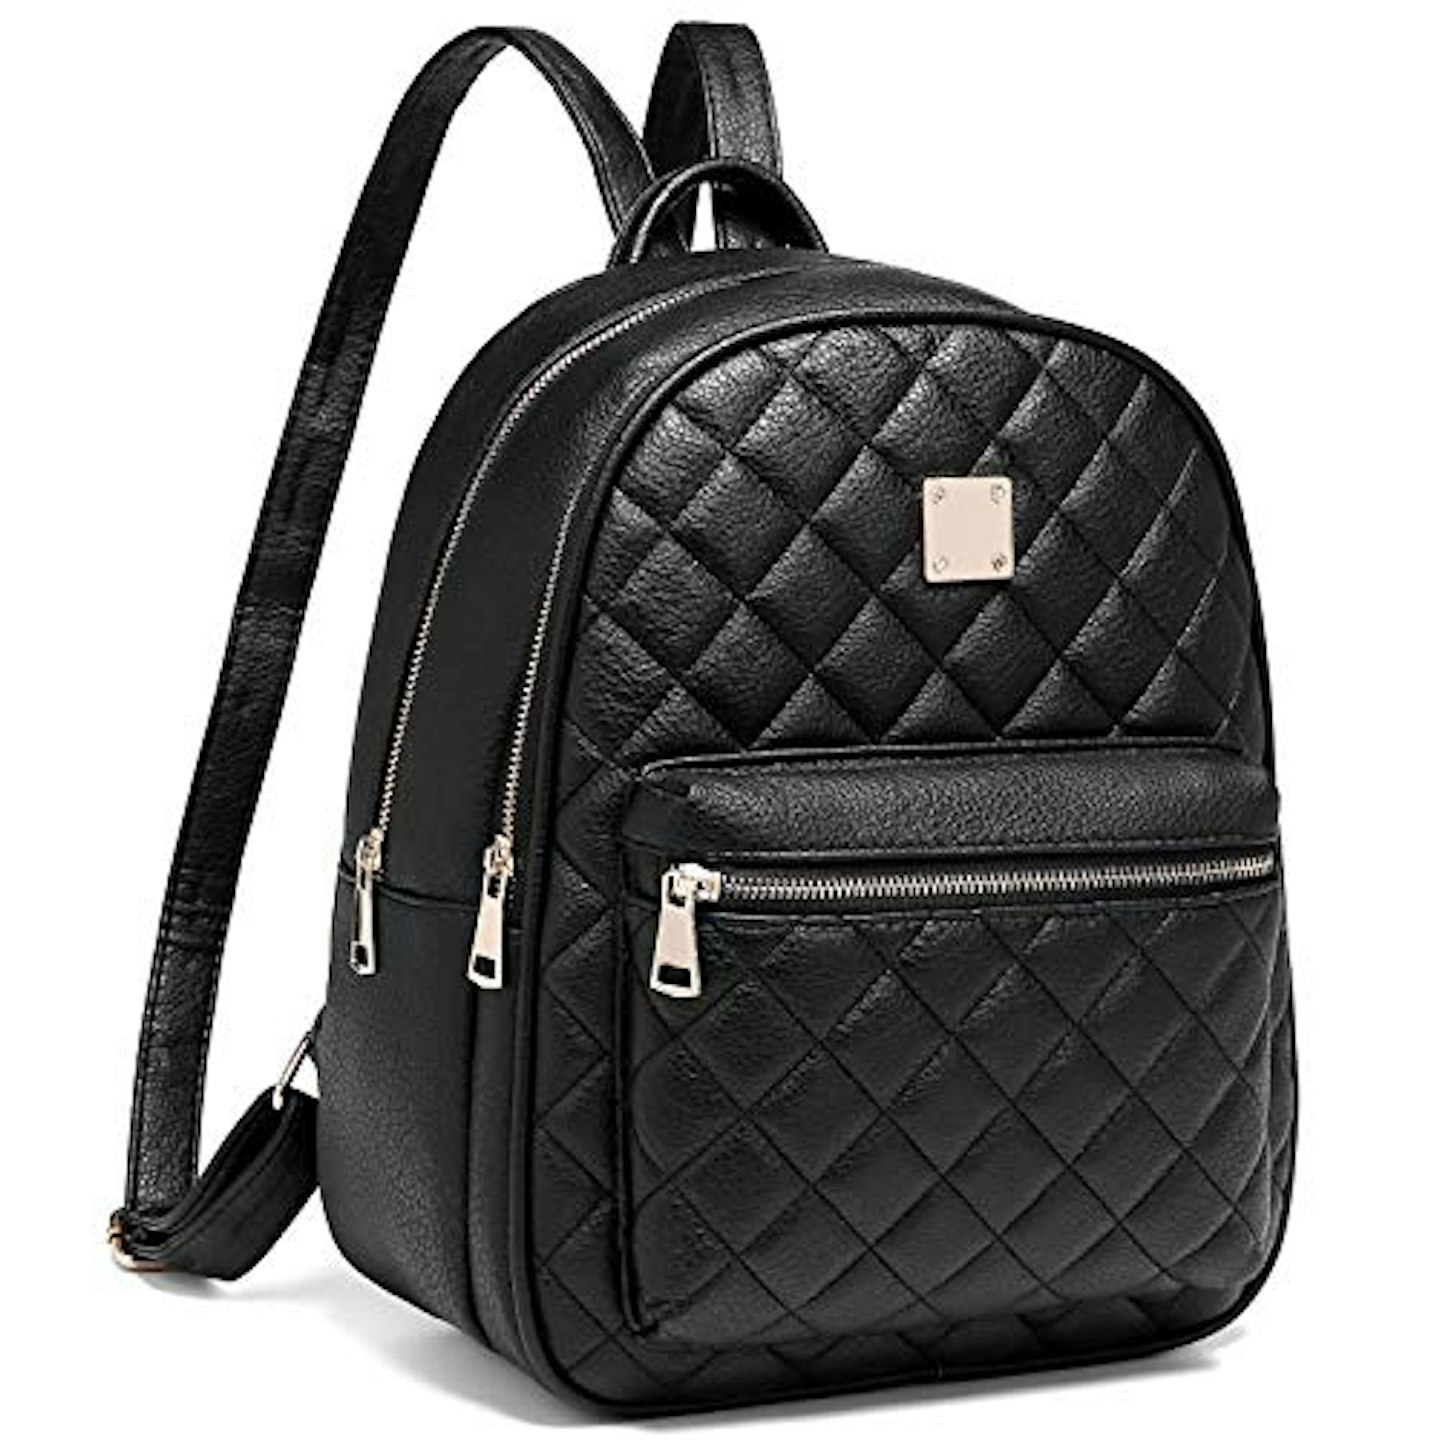 SPRING PARK Faux Leather Backpack Woman Travel Bag Backpack for Women